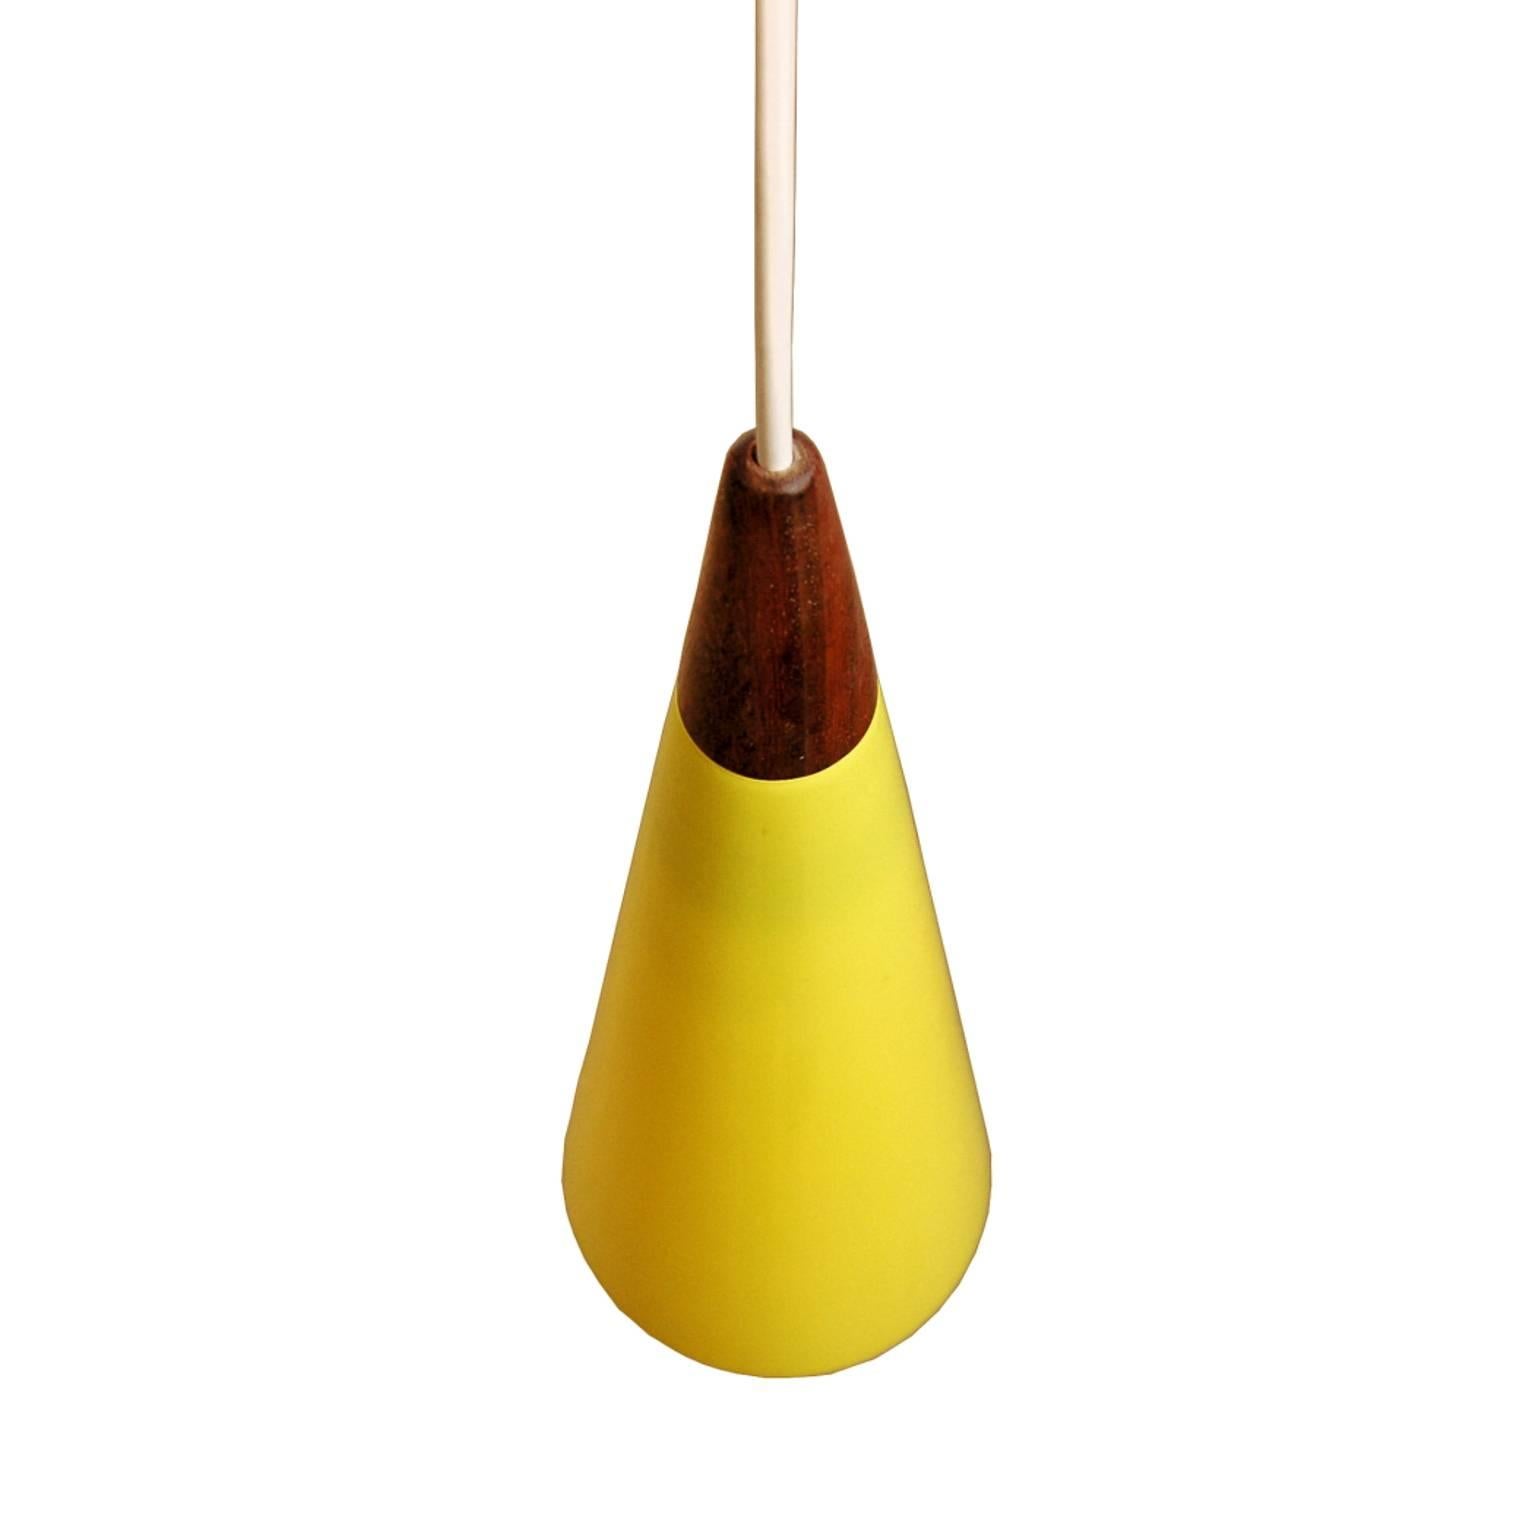 Beautiful set of bright yellow pendant lamps. Released by Fog and Morup in the early 1960s under the name 'trompet.' The opaline glass lampshade is by the famous Holmegaard glass company. The small peace of elegantly shaped teak completes the design